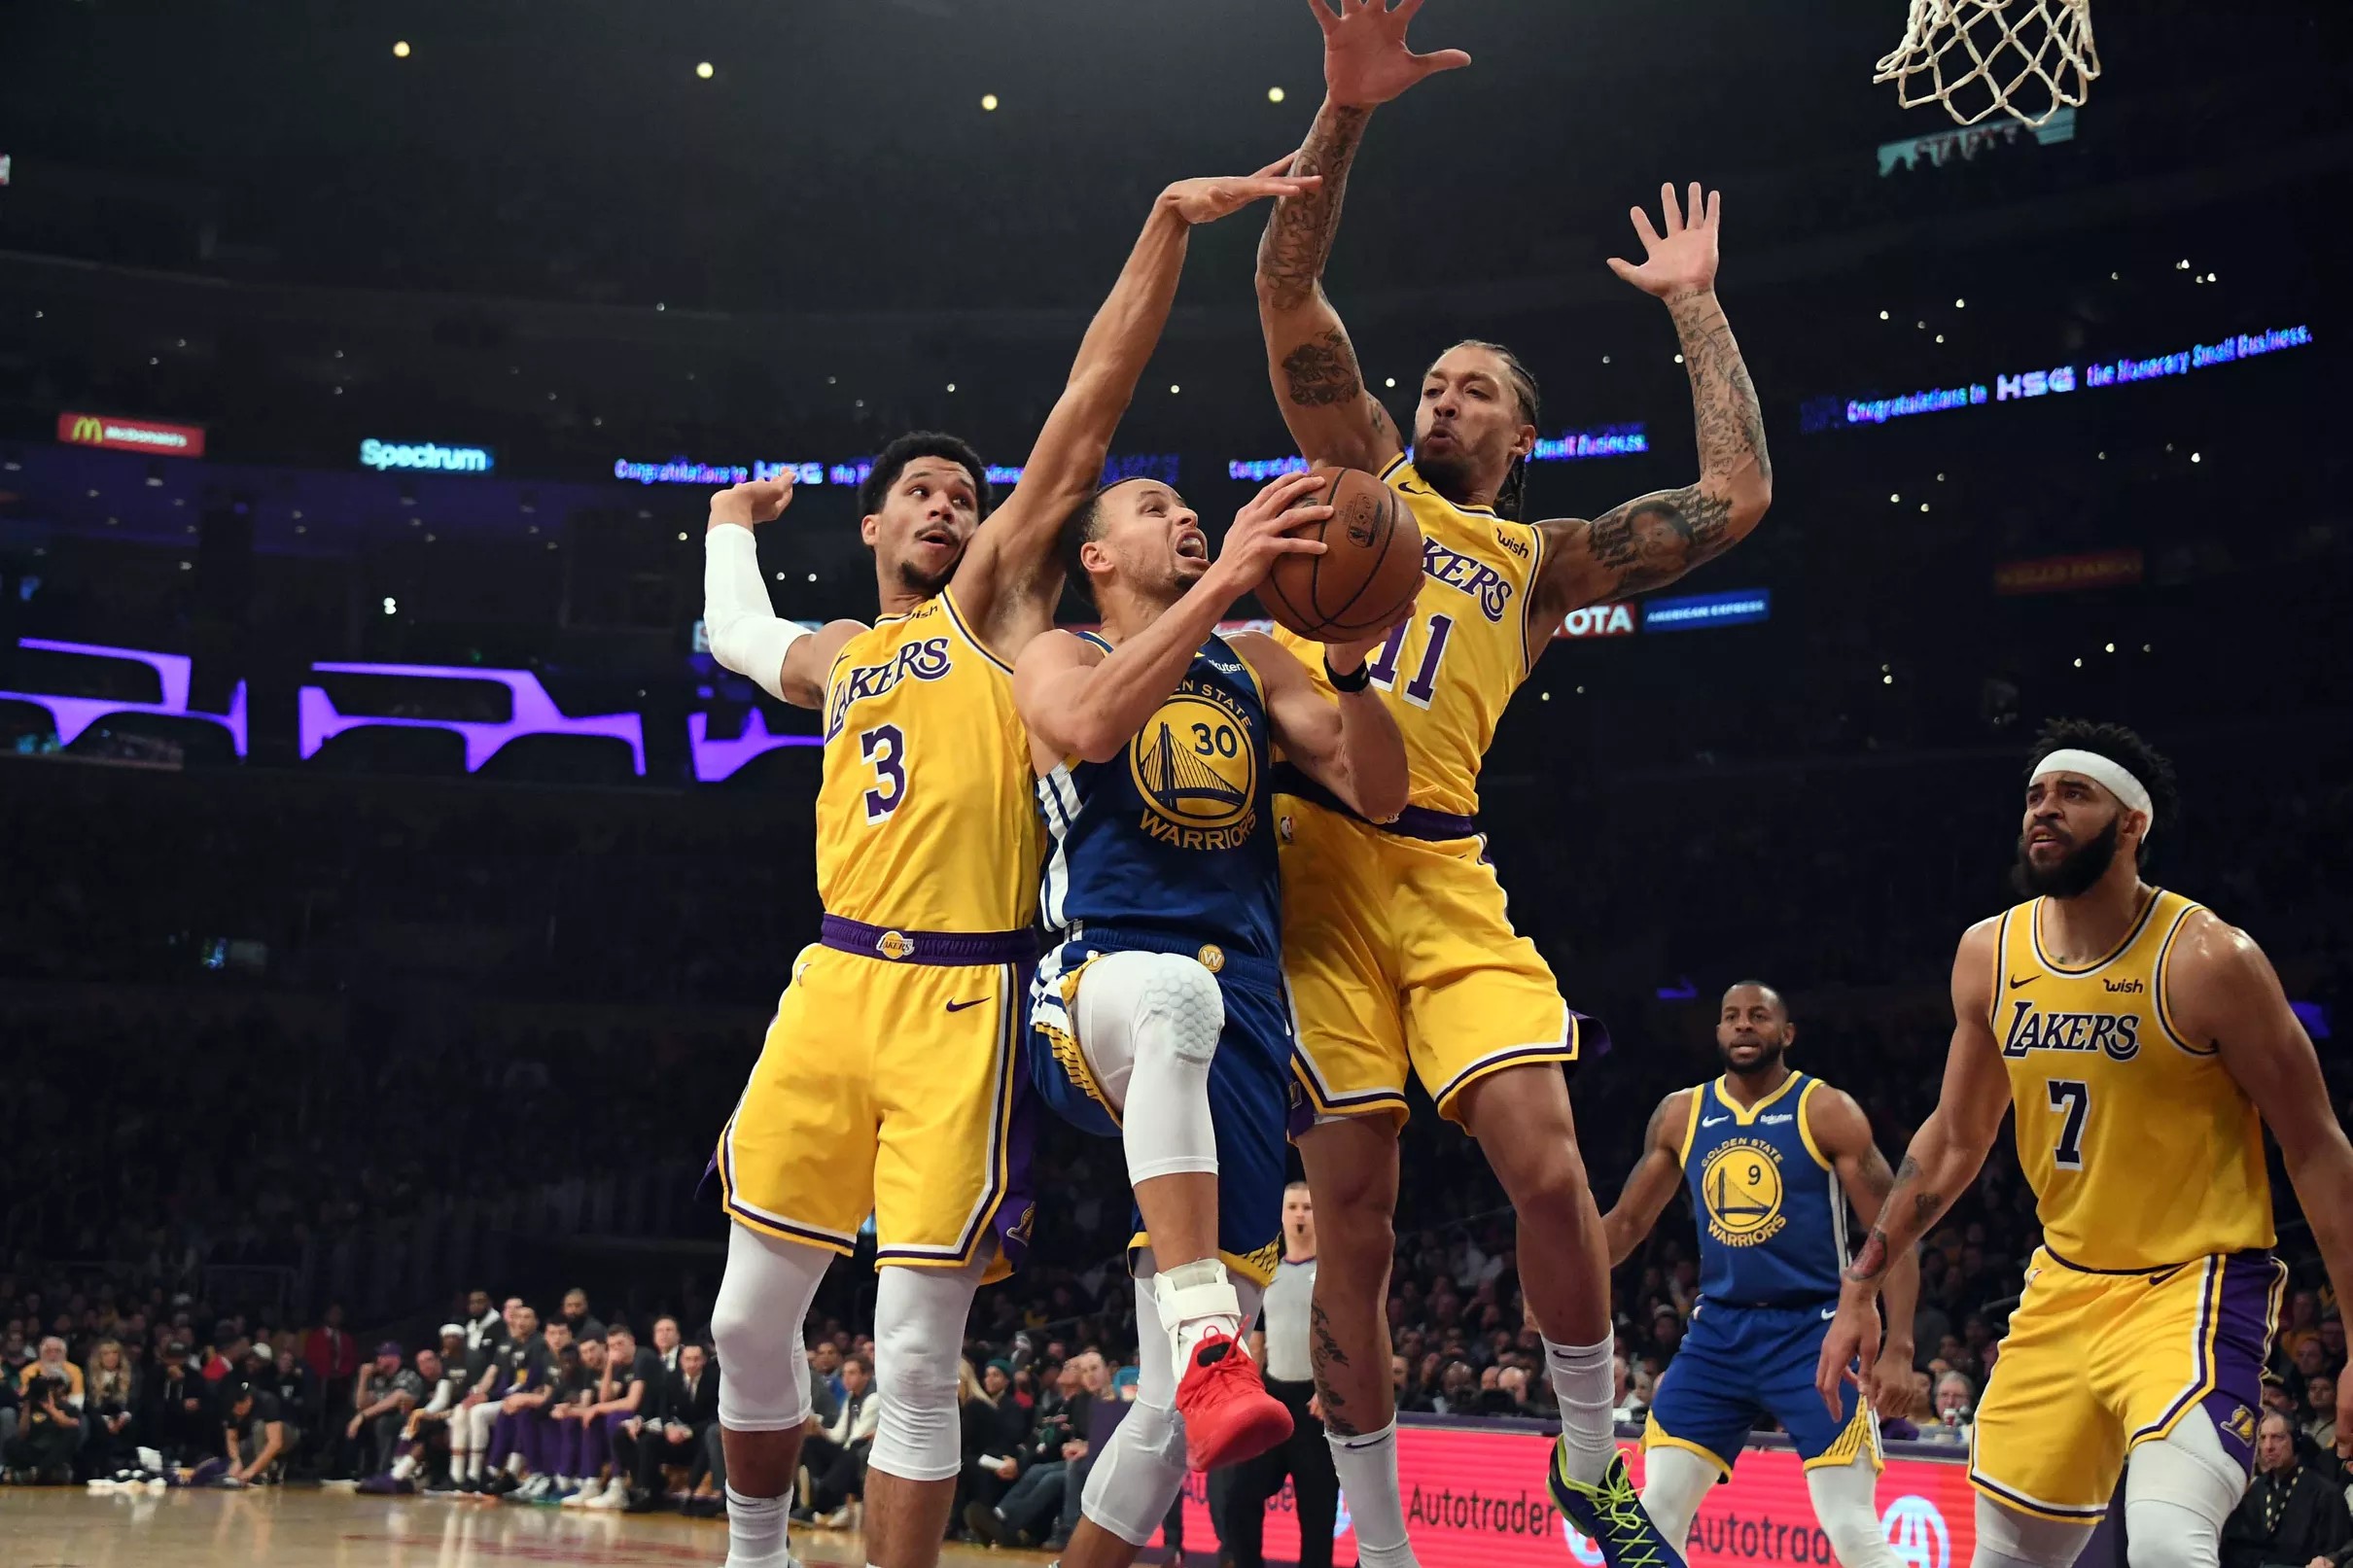 Lakers vs. Warriors Preview The fight for L.A.’s playoff chances